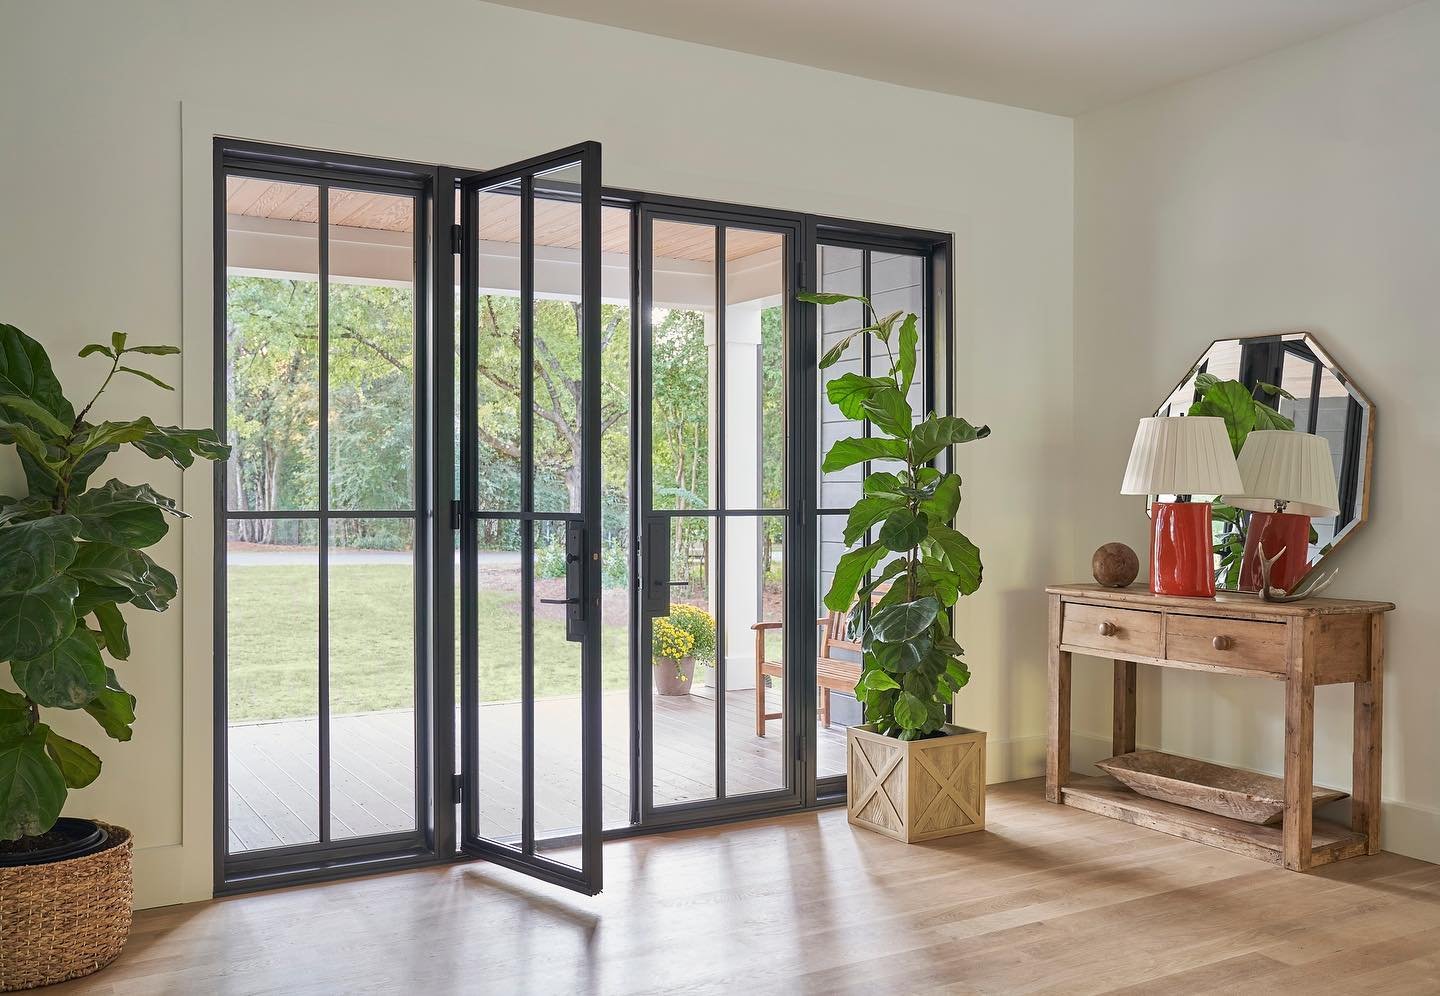 &ldquo;Imagine welcoming potential buyers into your listings with doors that make a statement and leave a lasting impression. With our custom doors, you can elevate the curb appeal and value of your properties effortlessly.

Our doors are not just en